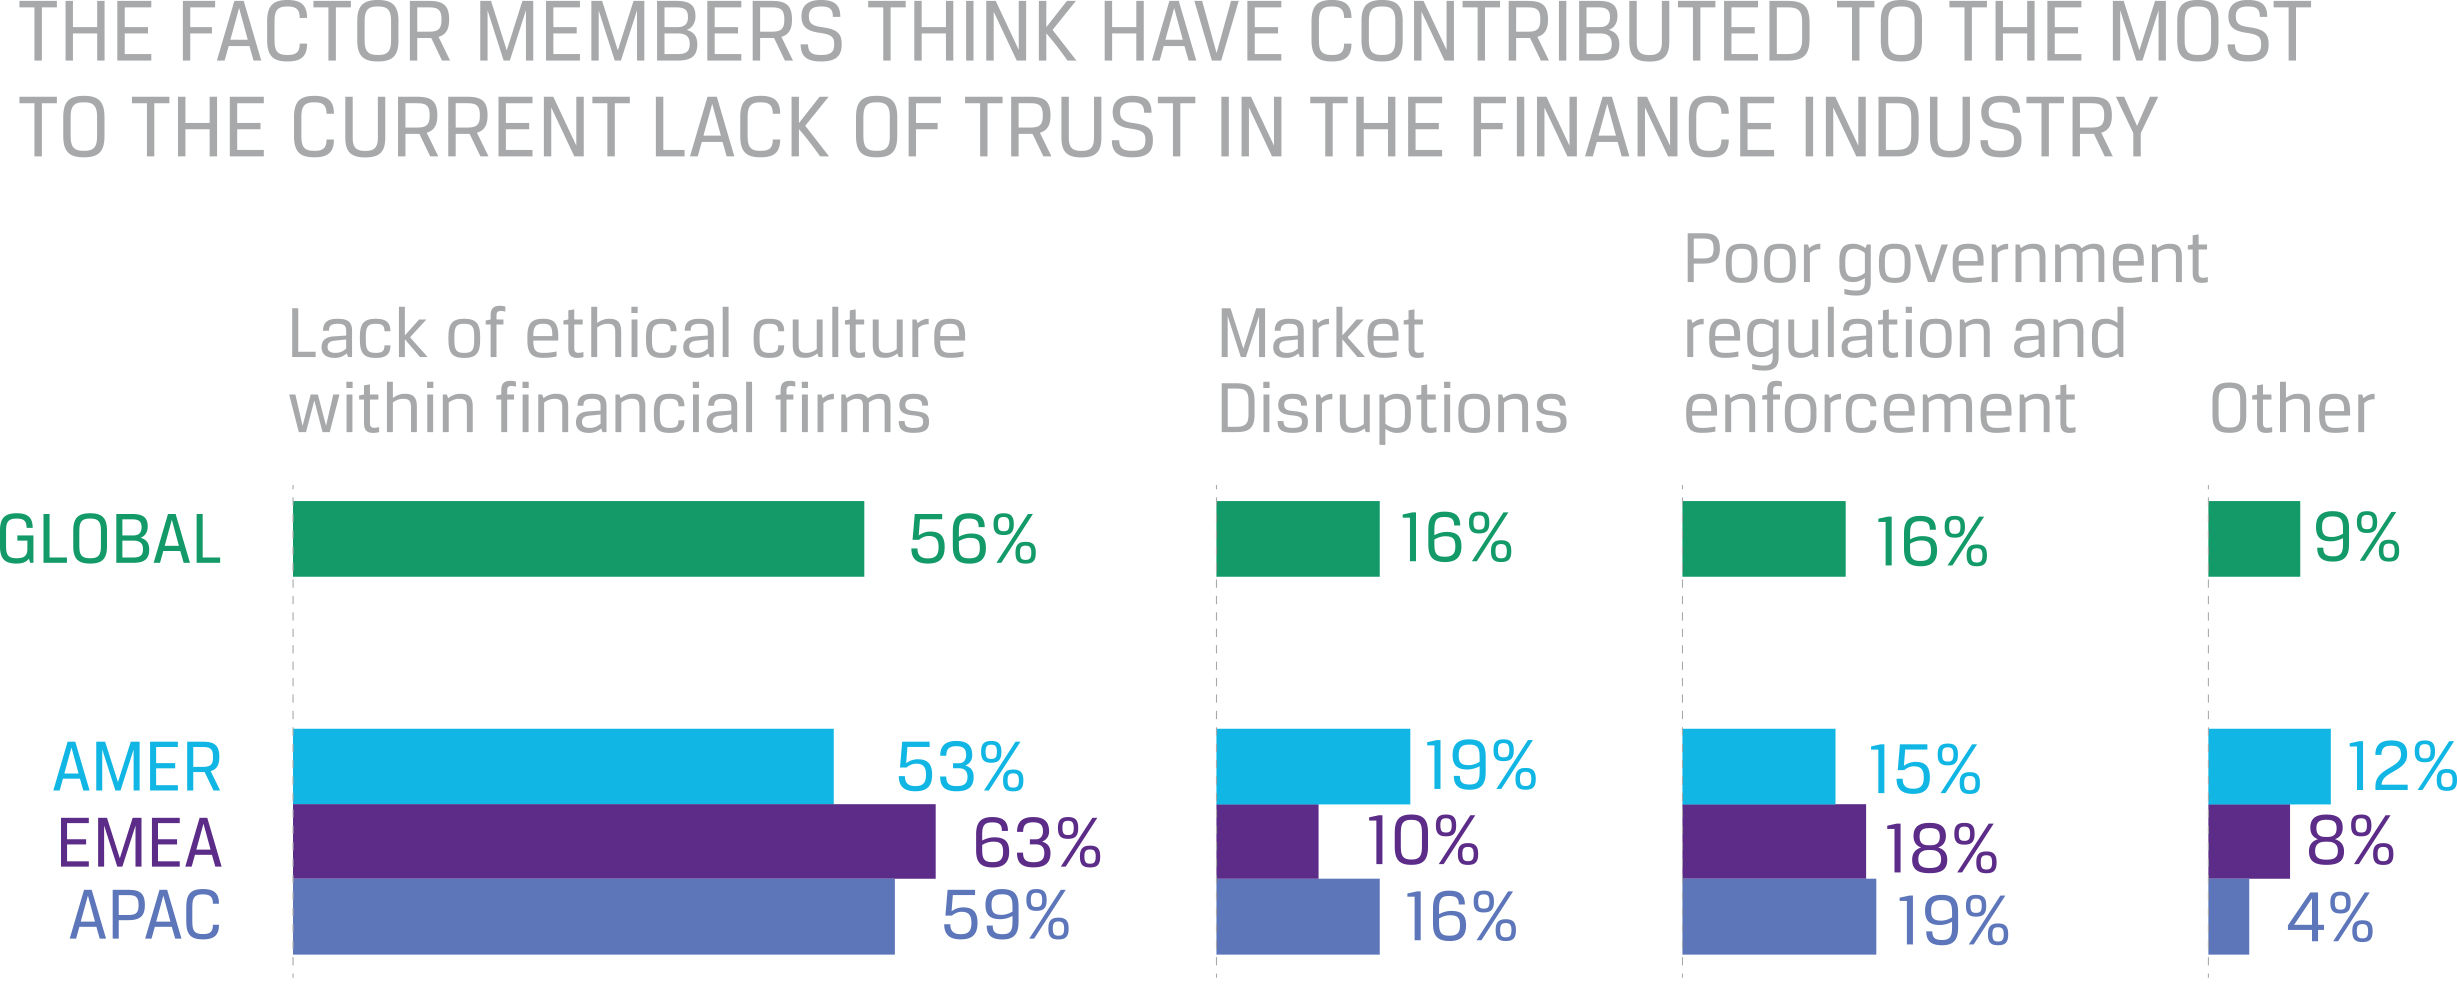 Current lack of trust in the industry